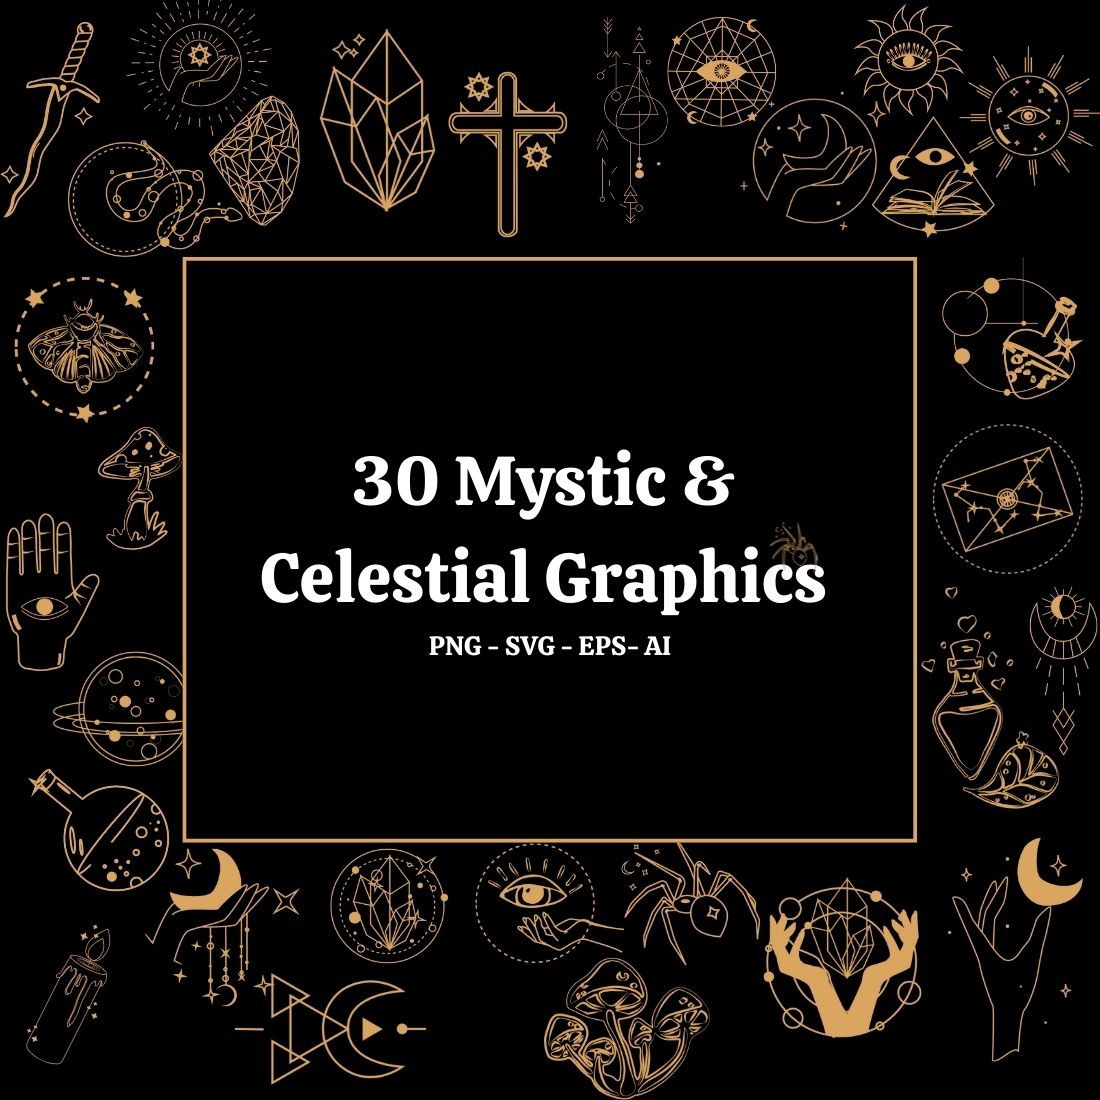 Celestial and Mystic Cliparts Design cover image.